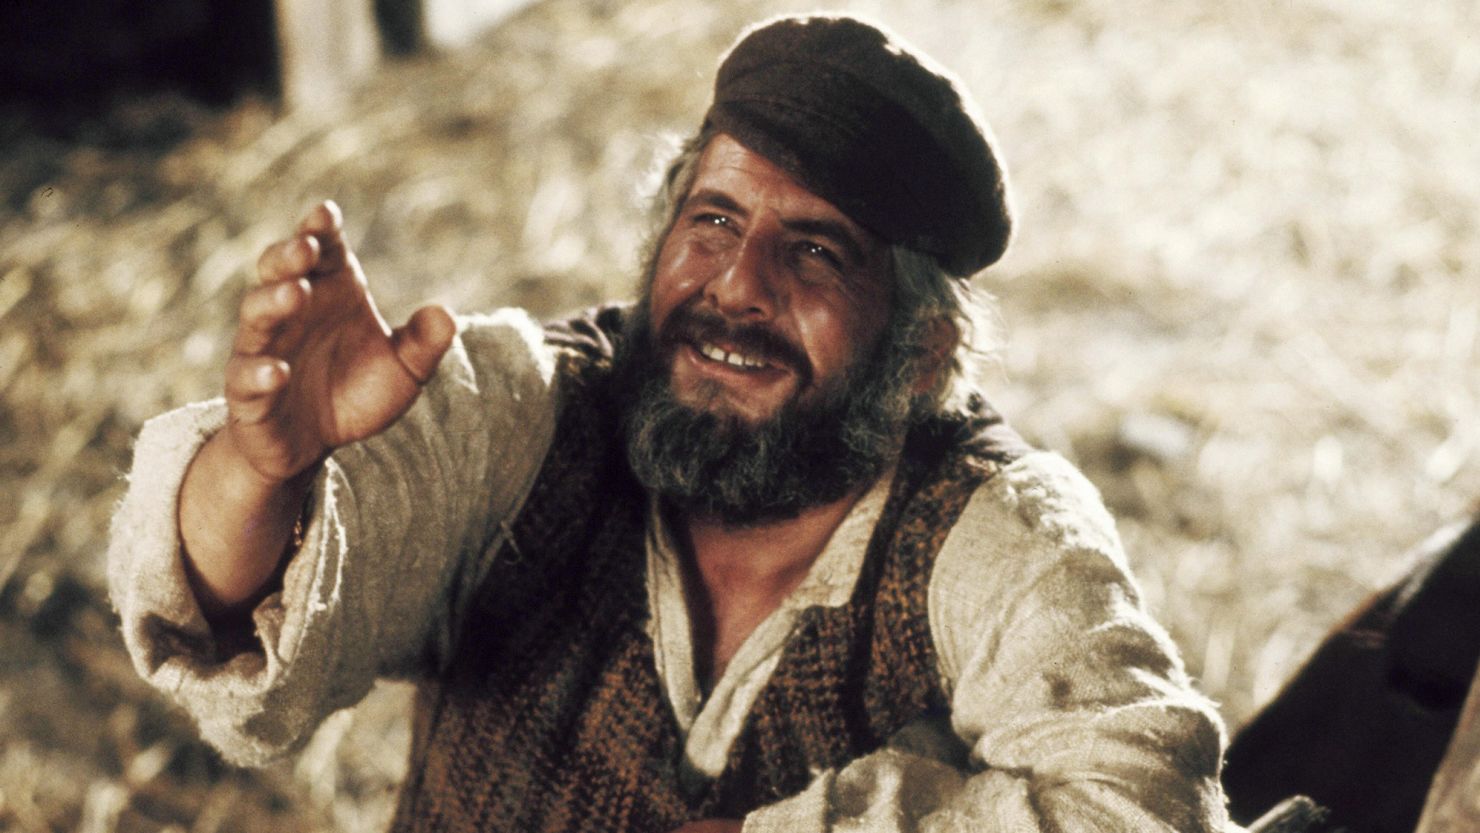 Chaim Topol, playing Tevye in the film adaptation of "Fiddler on the Roof."